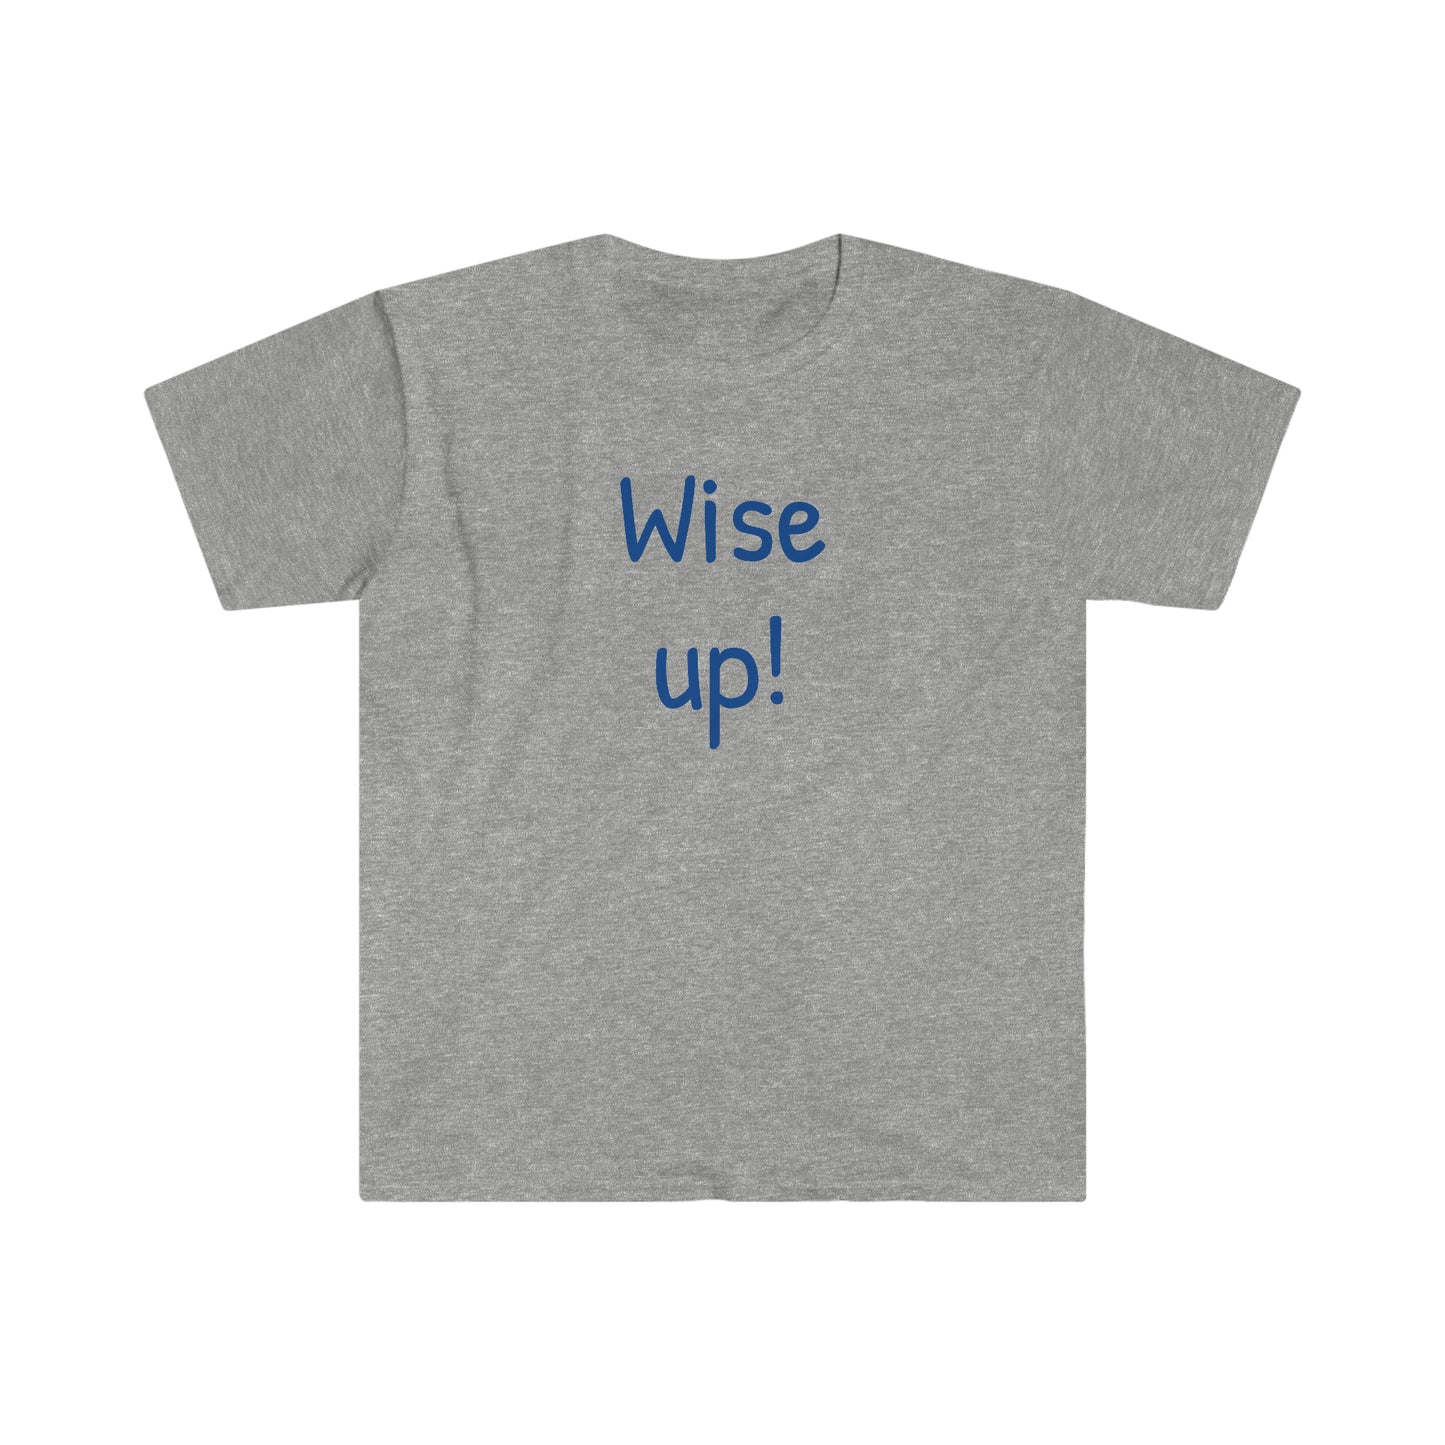 Wise up! T-shirt